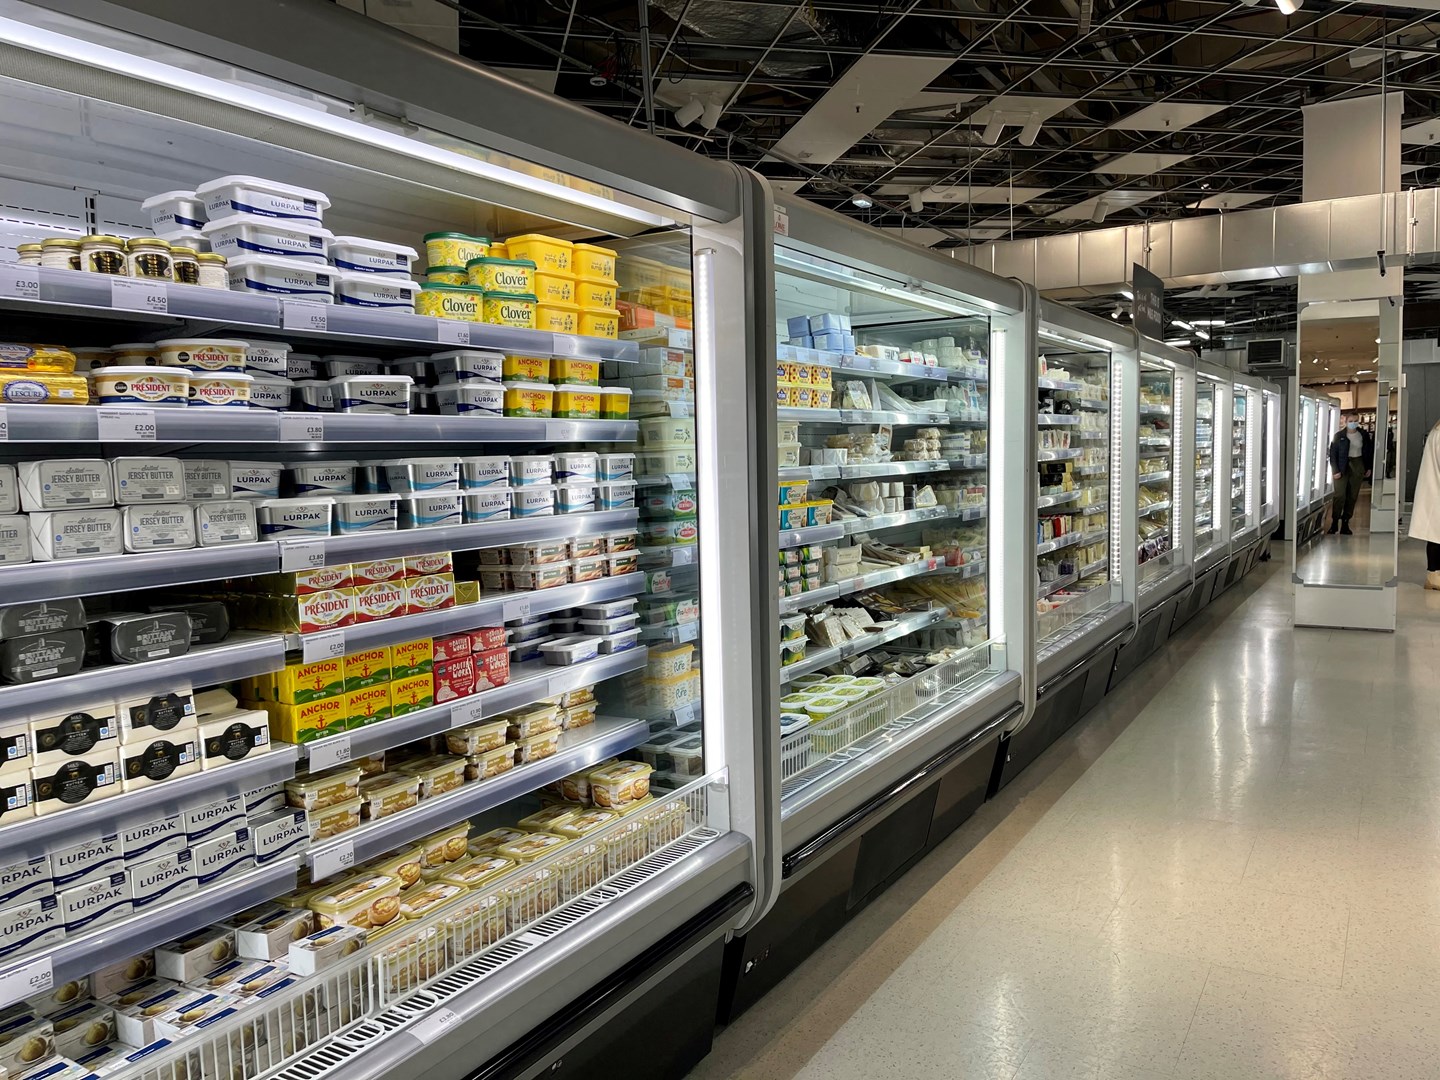 Rental Refrigeration & Catering Equipment Experts